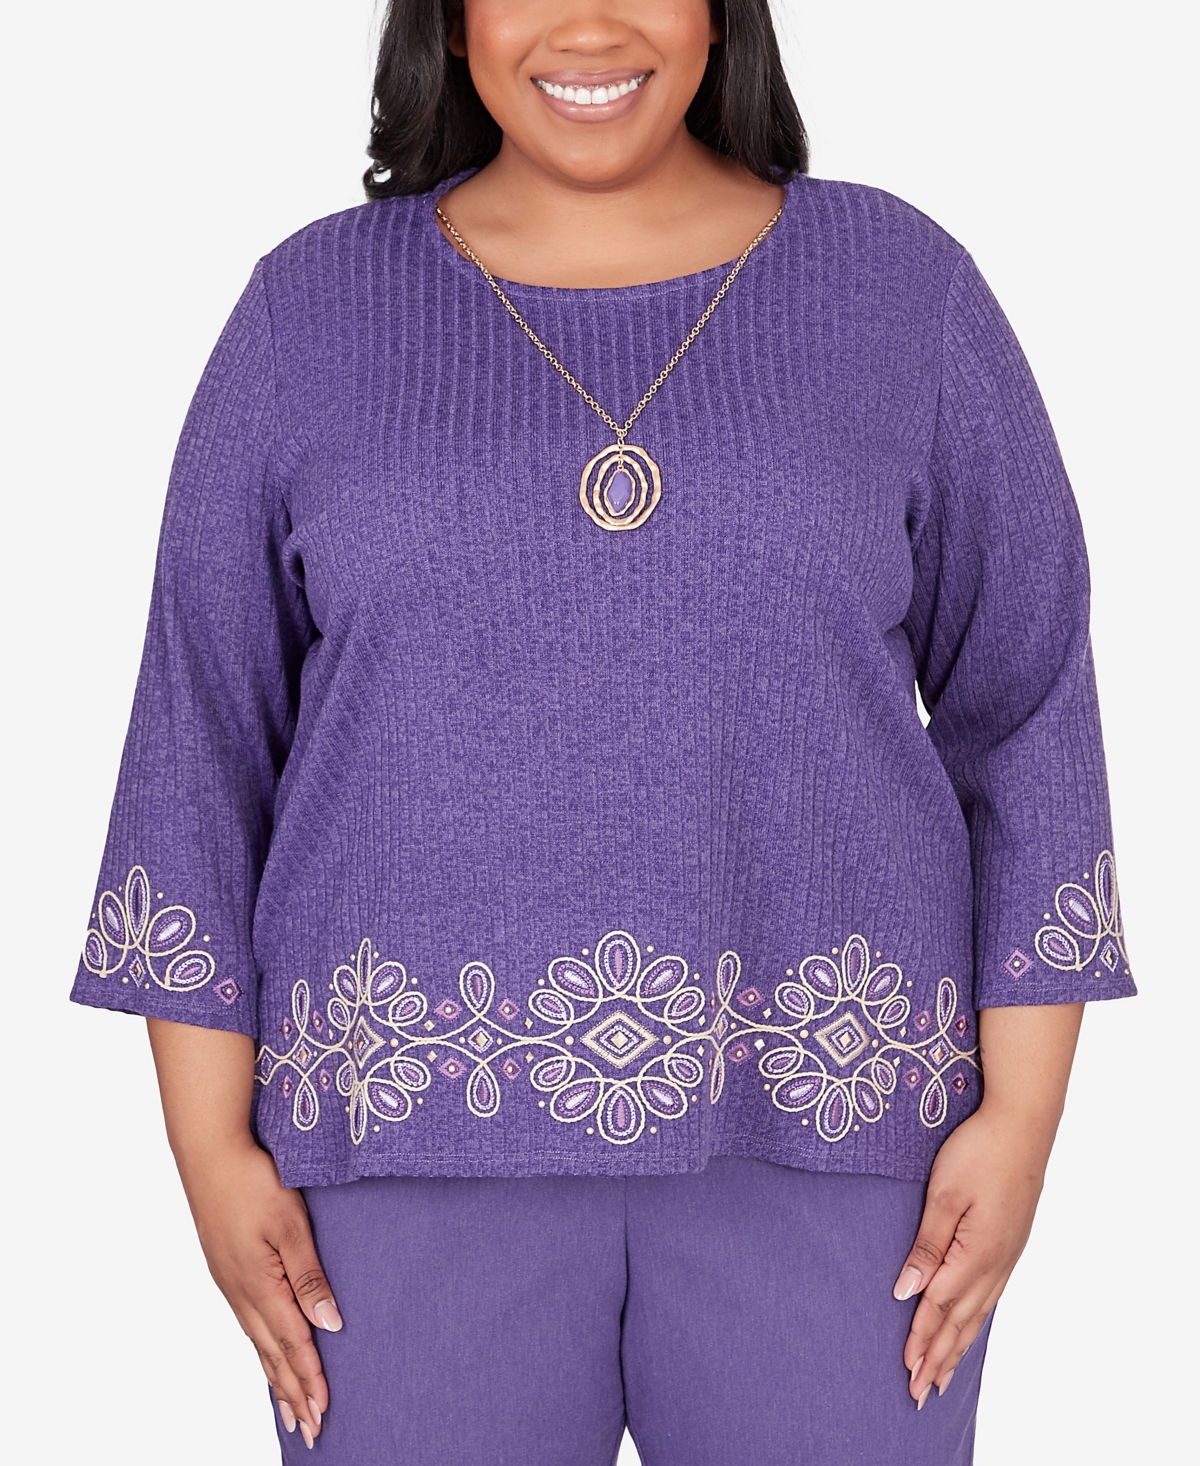 Plus Size Charm School Embroidered Medallion Top with Necklace - Iris